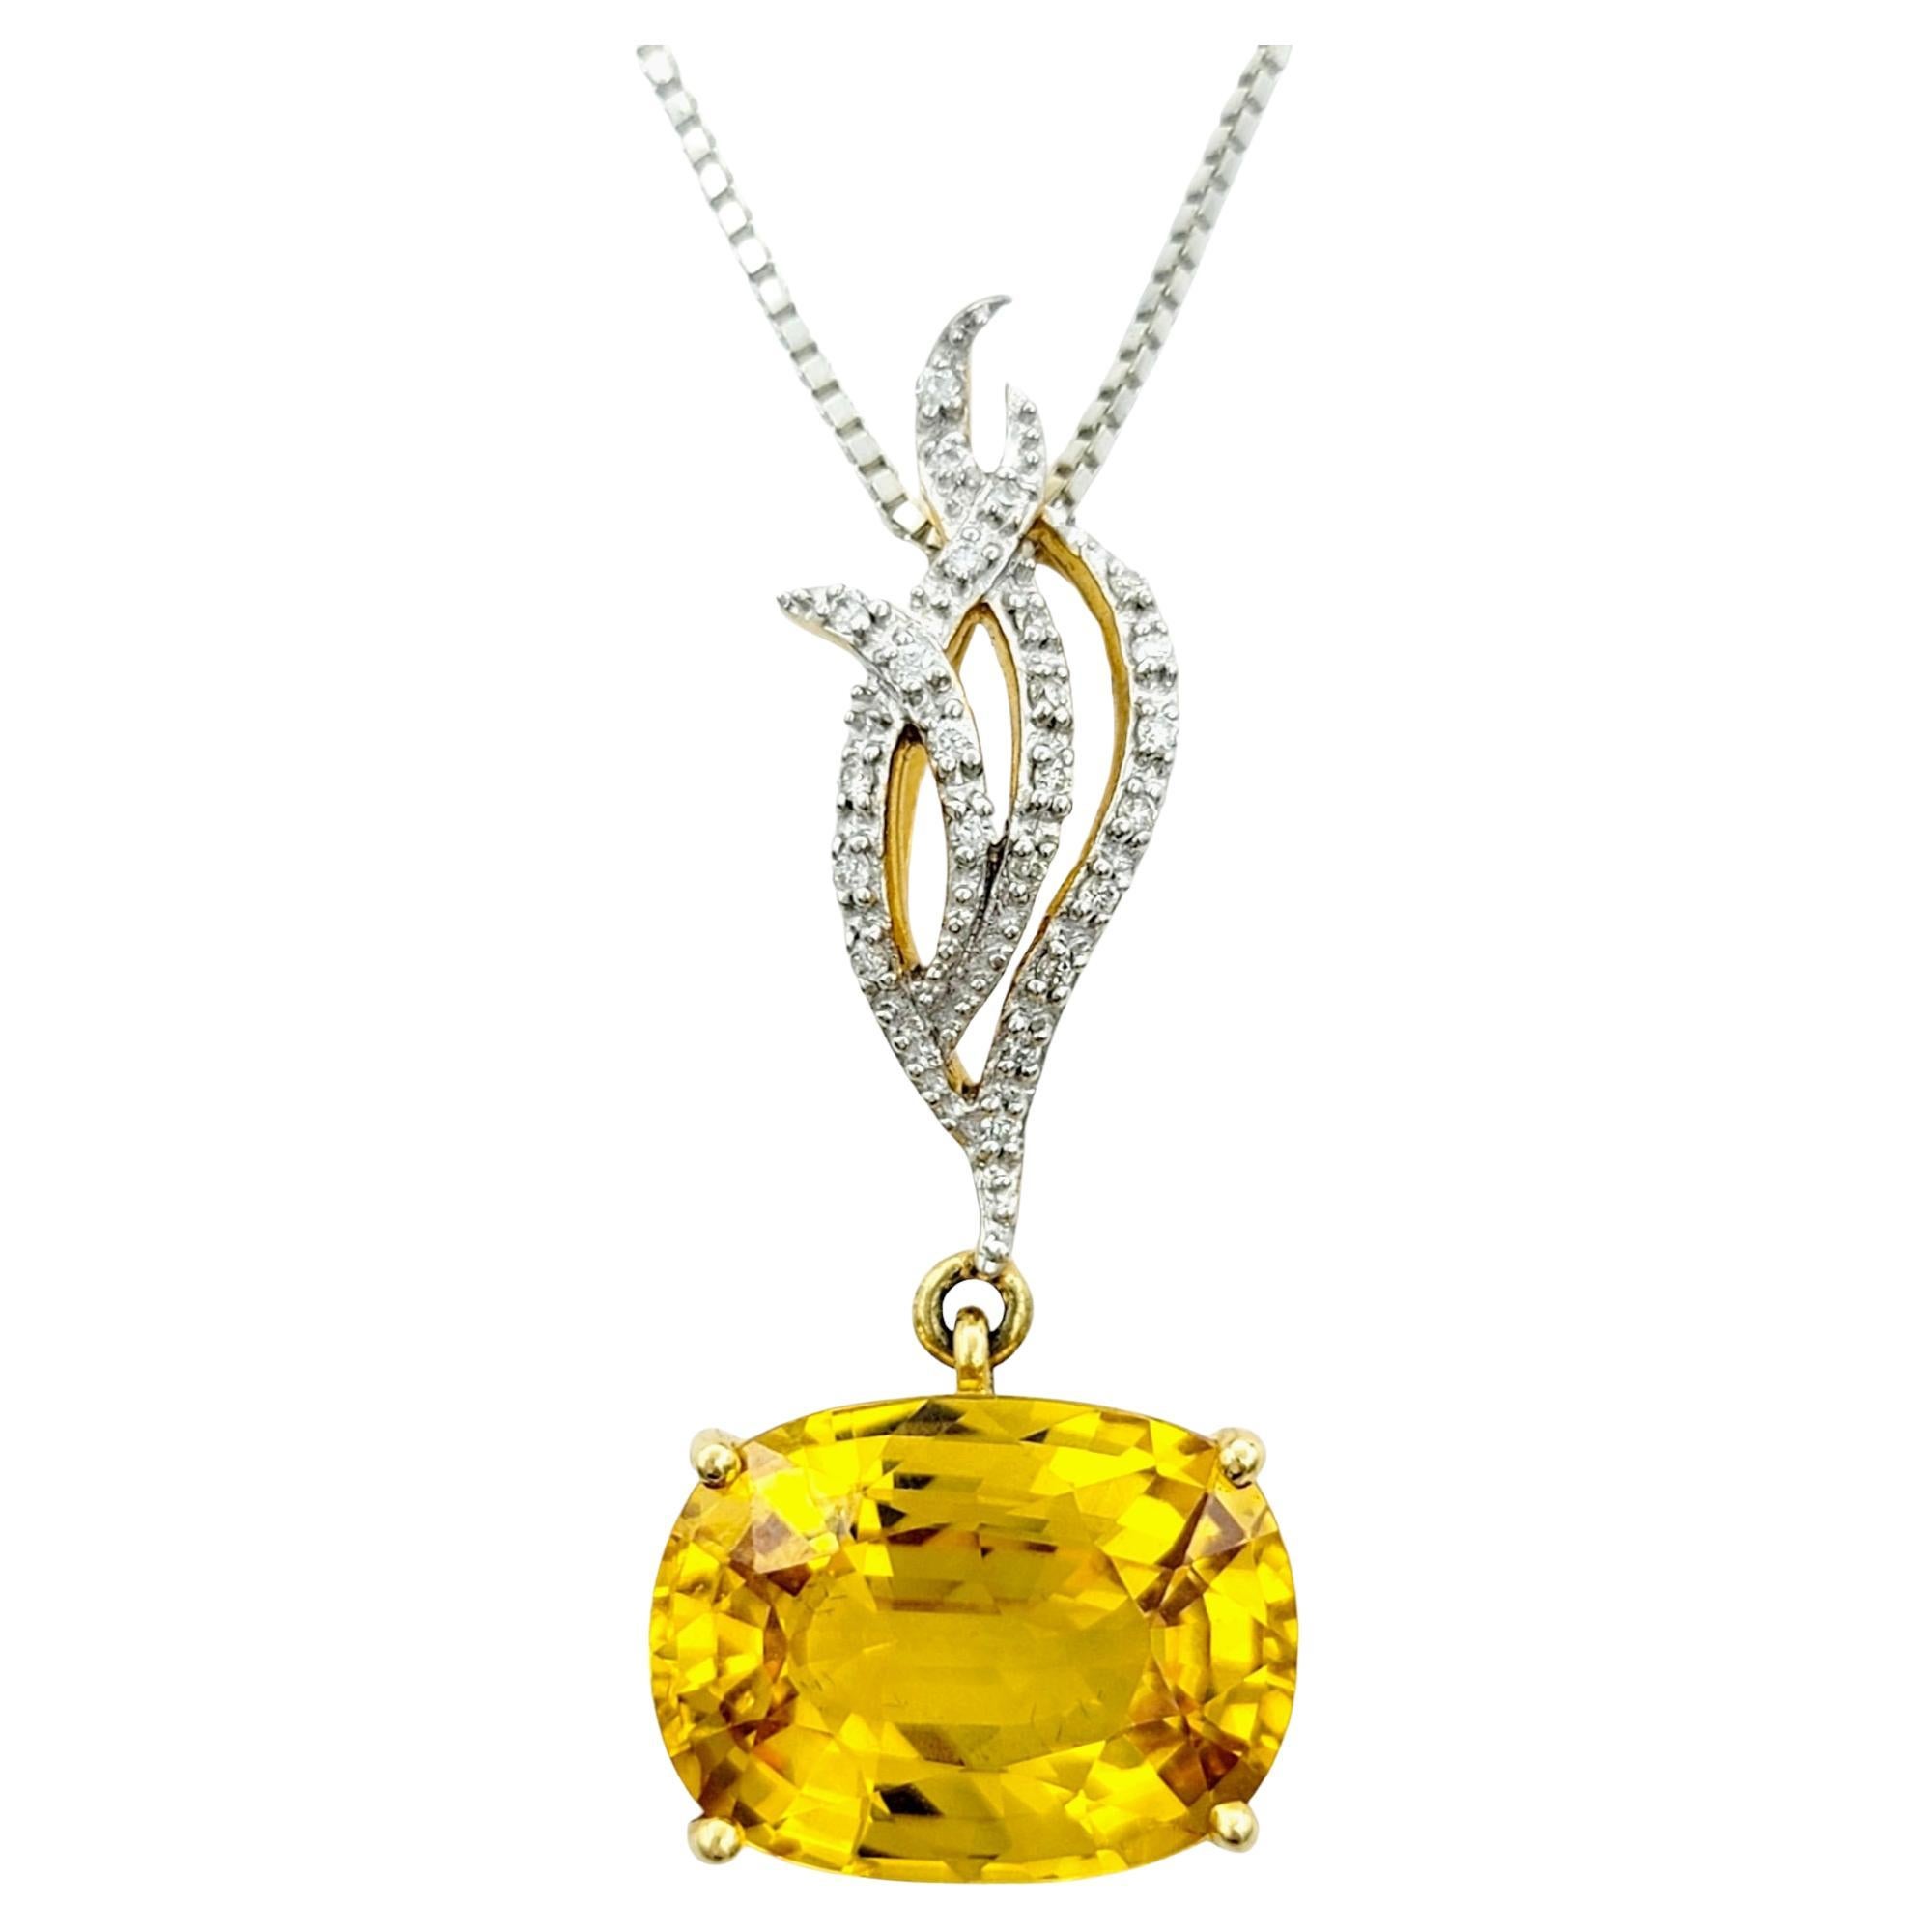 This elegant yellow sapphire pendant exudes timeless charm, combining the rich allure of the gemstone with the brilliance of the natural white diamonds set in 18 karat yellow gold.

The horizontally set gemstone, a captivating yellow oval sapphire,